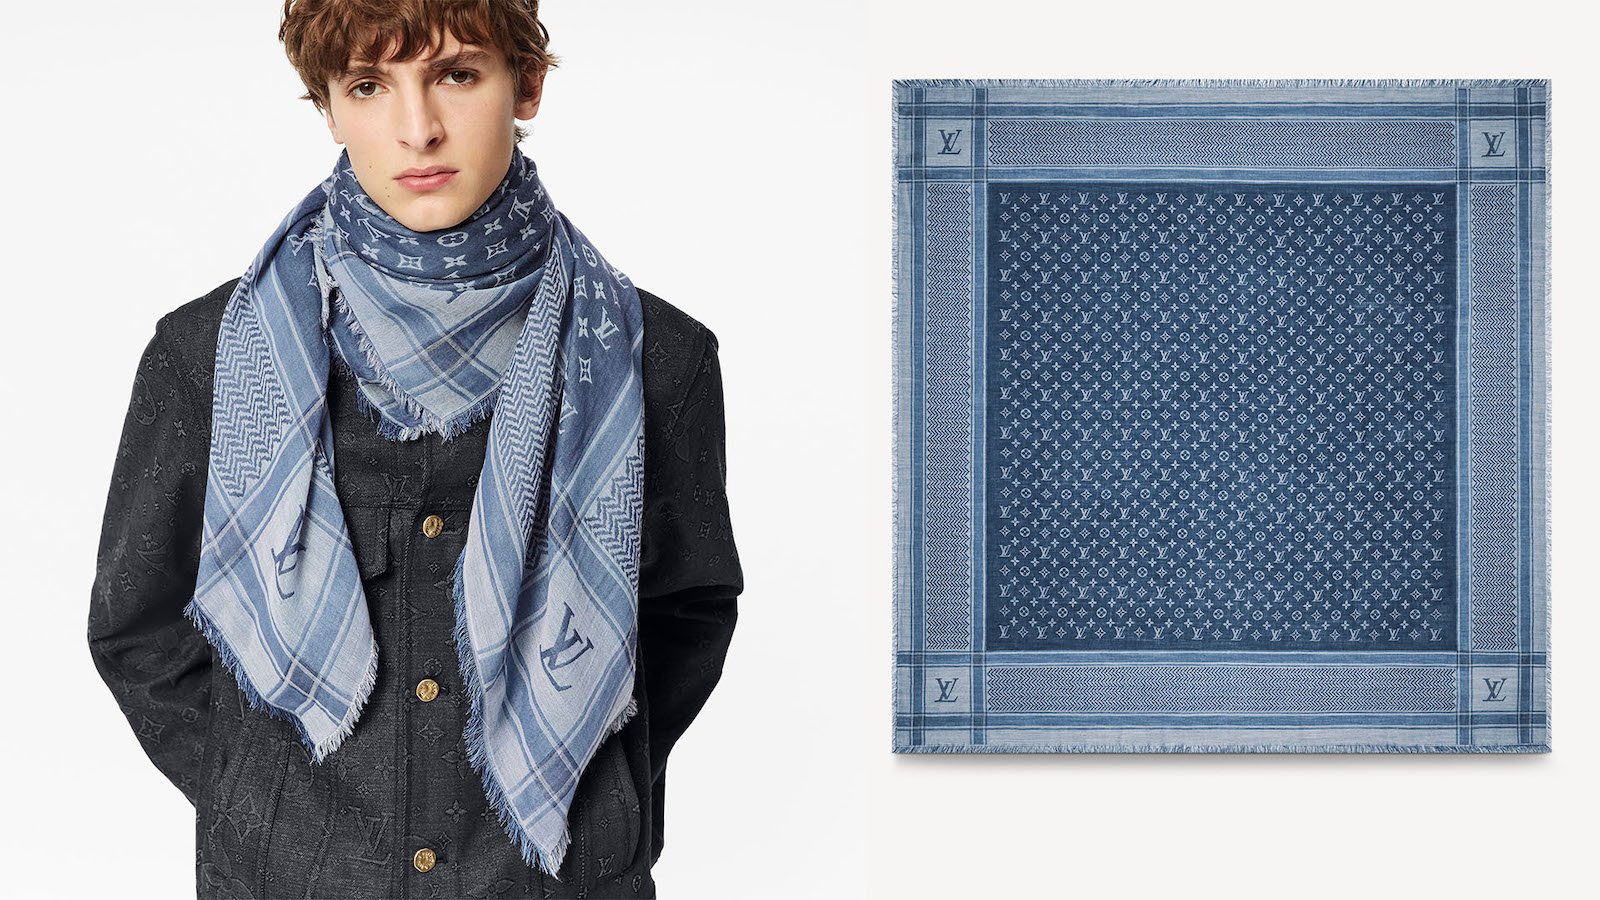 Louis Vuitton scarf from website after backlash | News